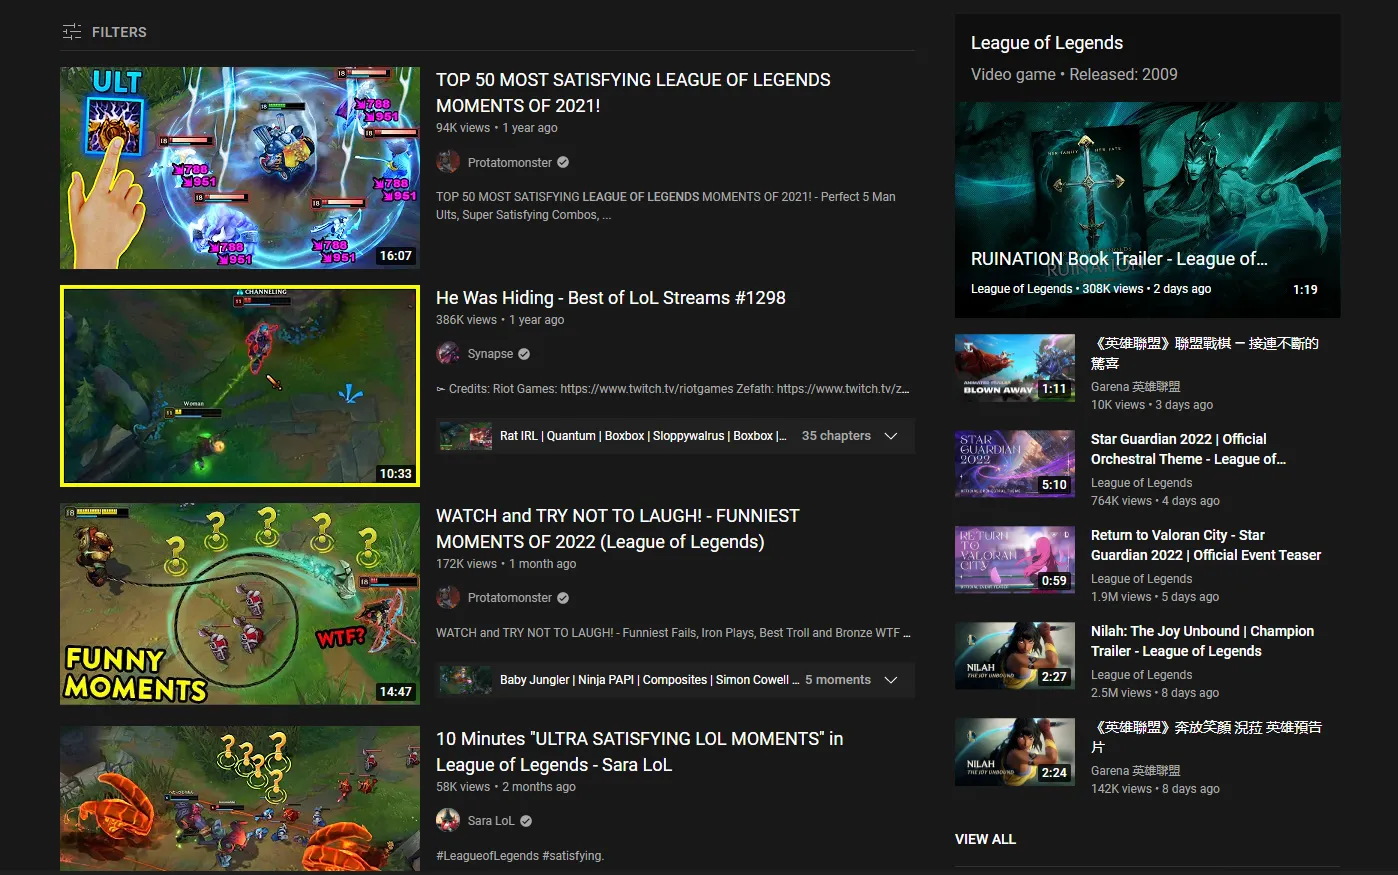 League Of Legends is one of the most searched games on YouTube.